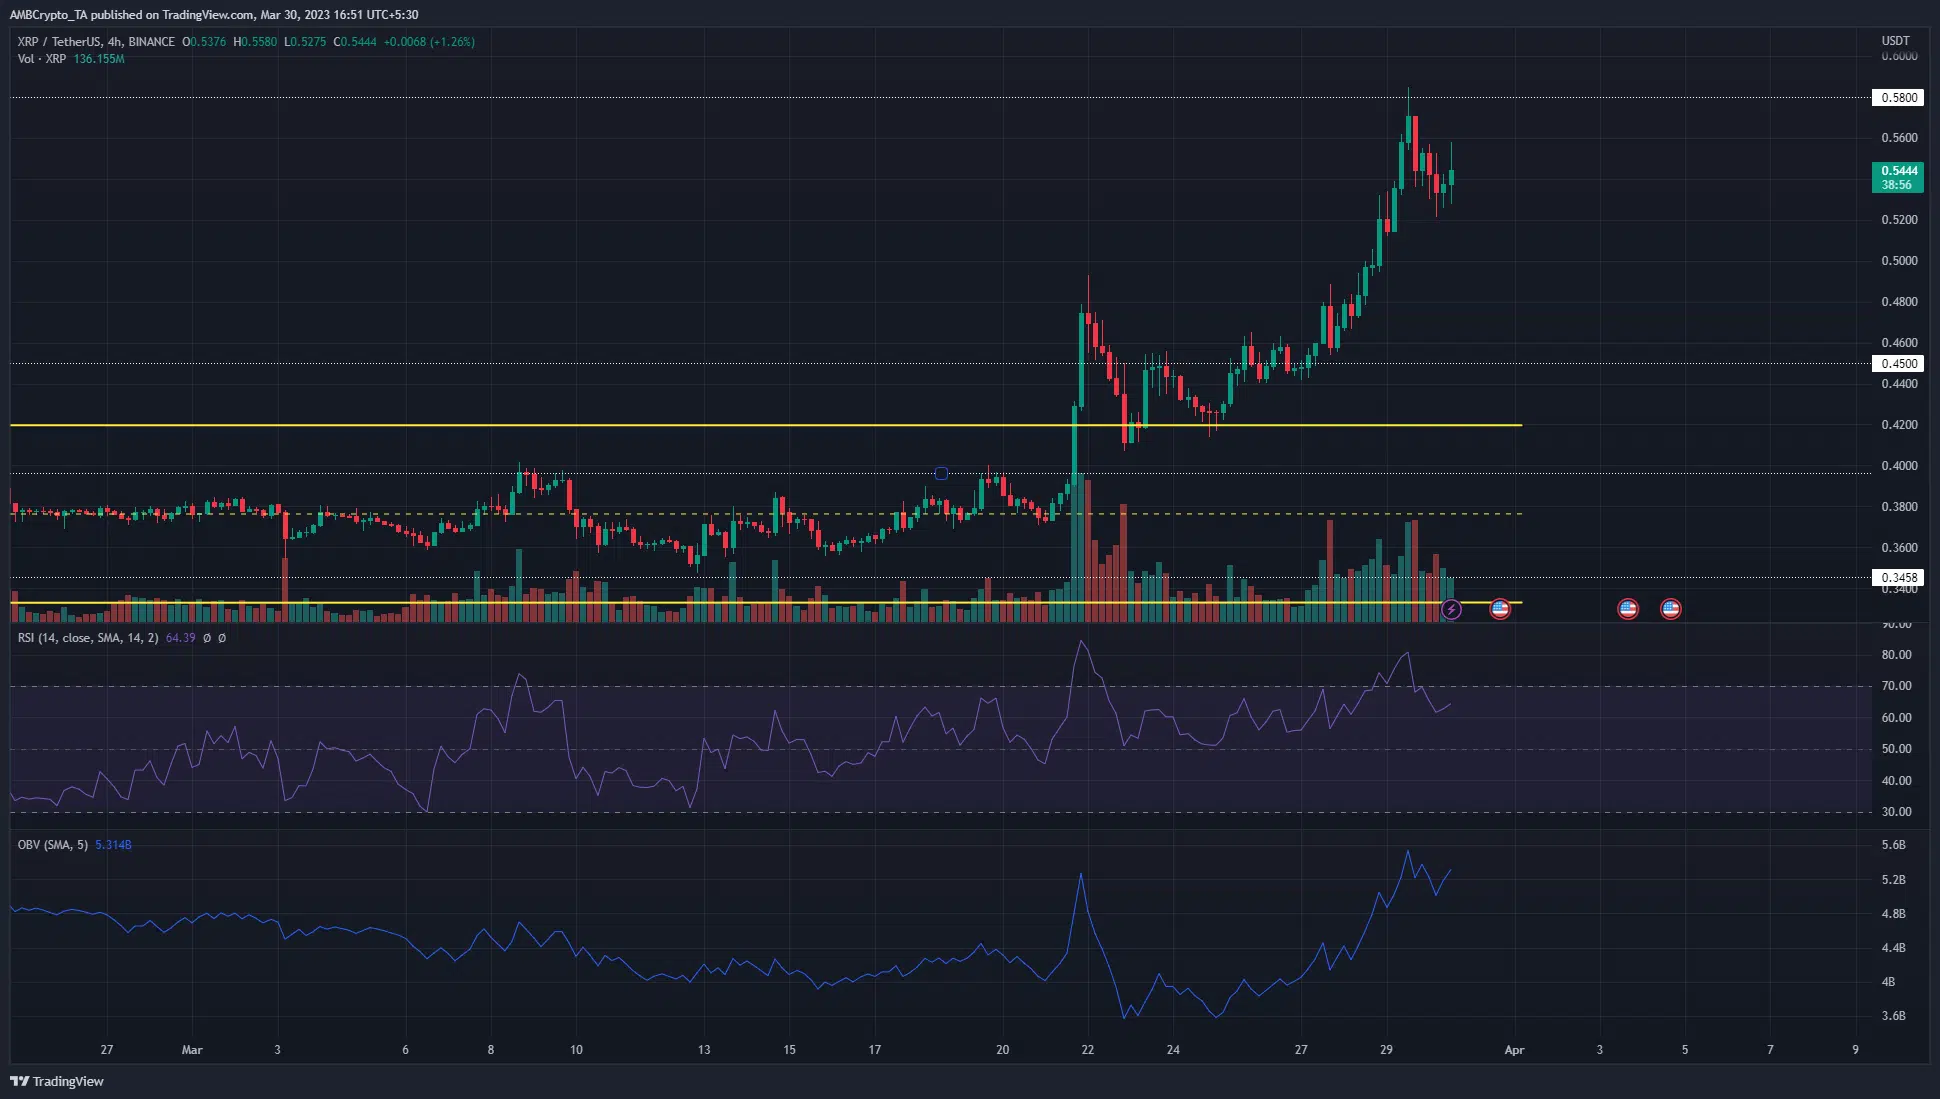 XRP shoots to the $0.58 resistance as eager bulls anticipate further gains